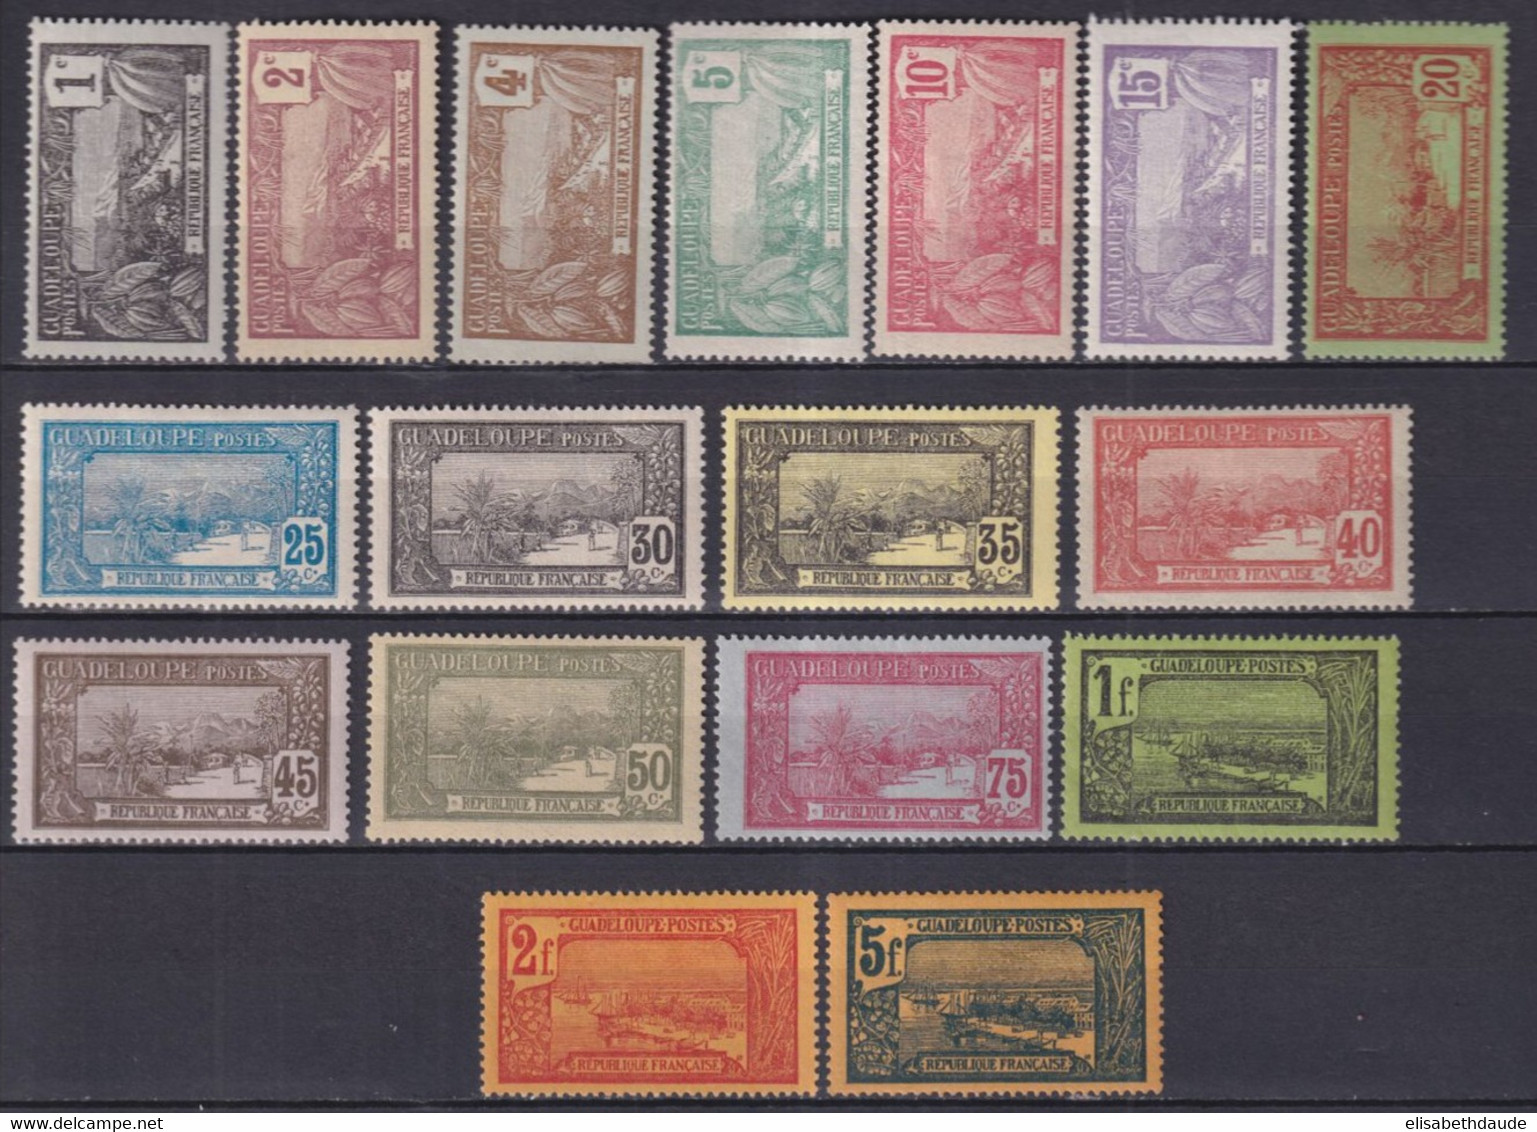 GUADELOUPE - 1905 - YVERT N°55/71 * MH - COTE = 41.5 EUR. - - Unused Stamps